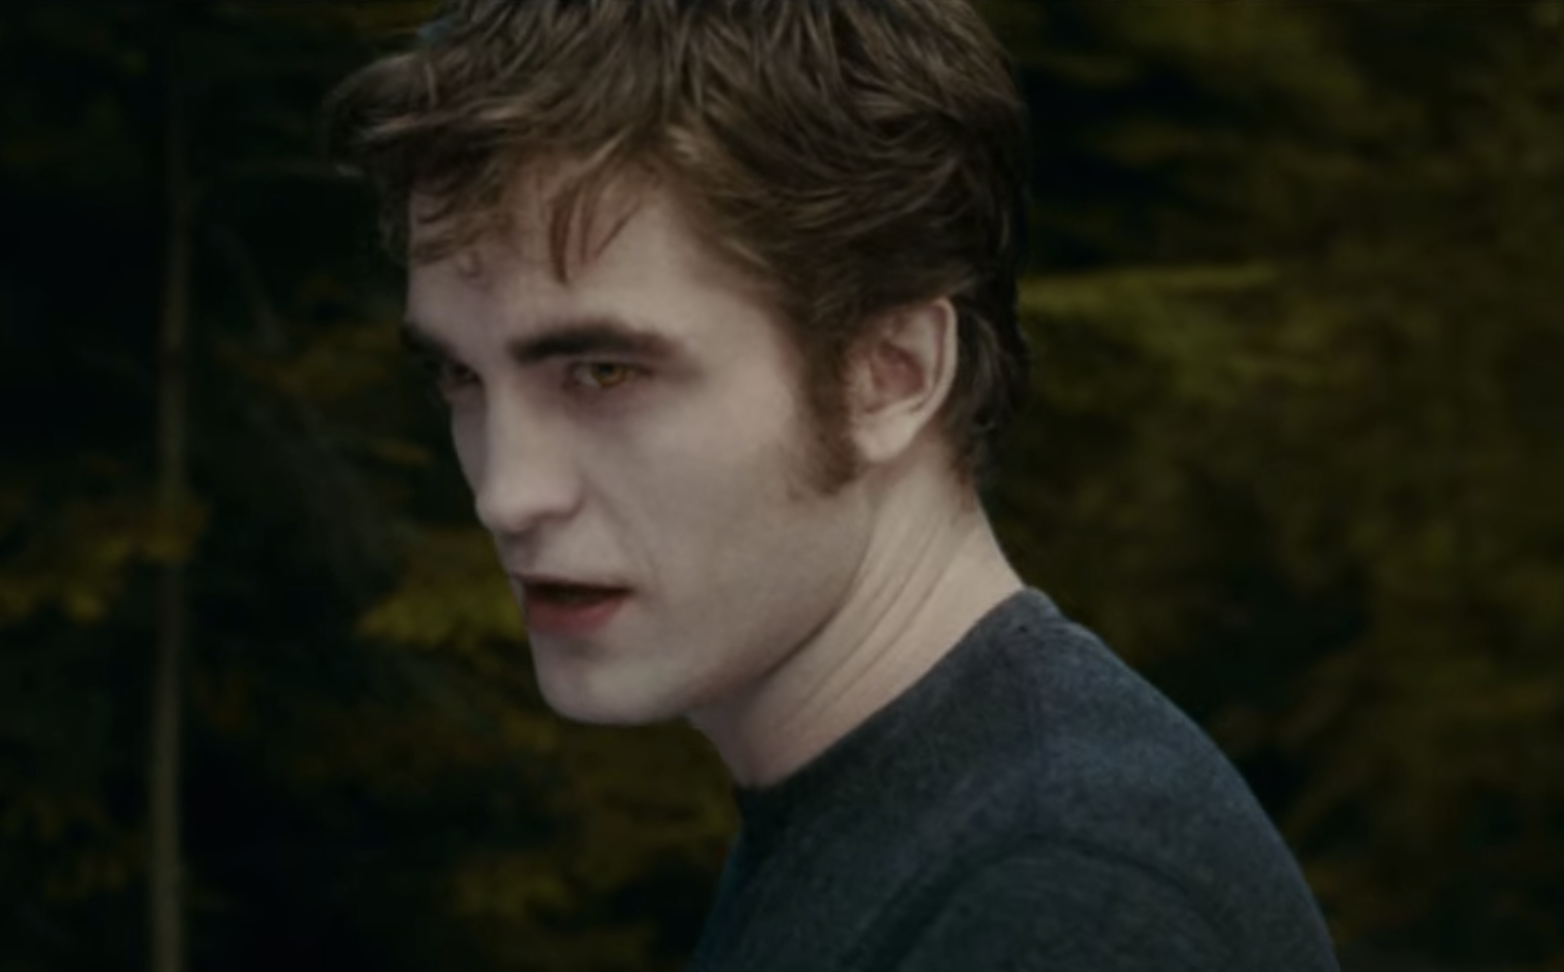 Edward stands in the forest with a fierce expression on his face